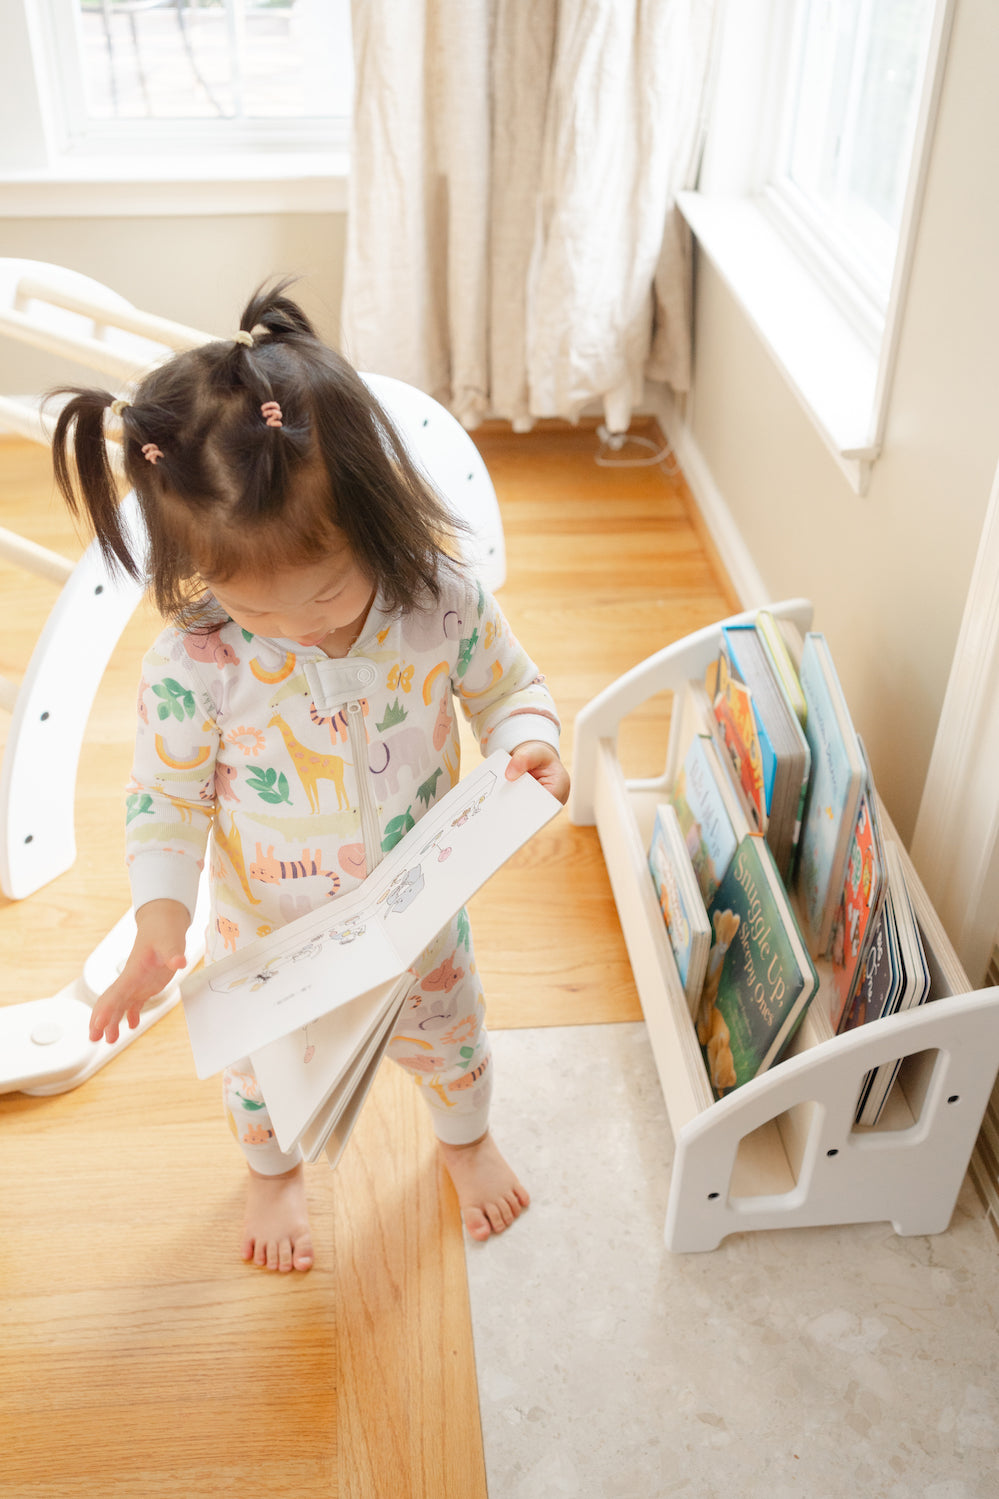 A bookshelf on hardwood floors that's easy to reach for toddlers